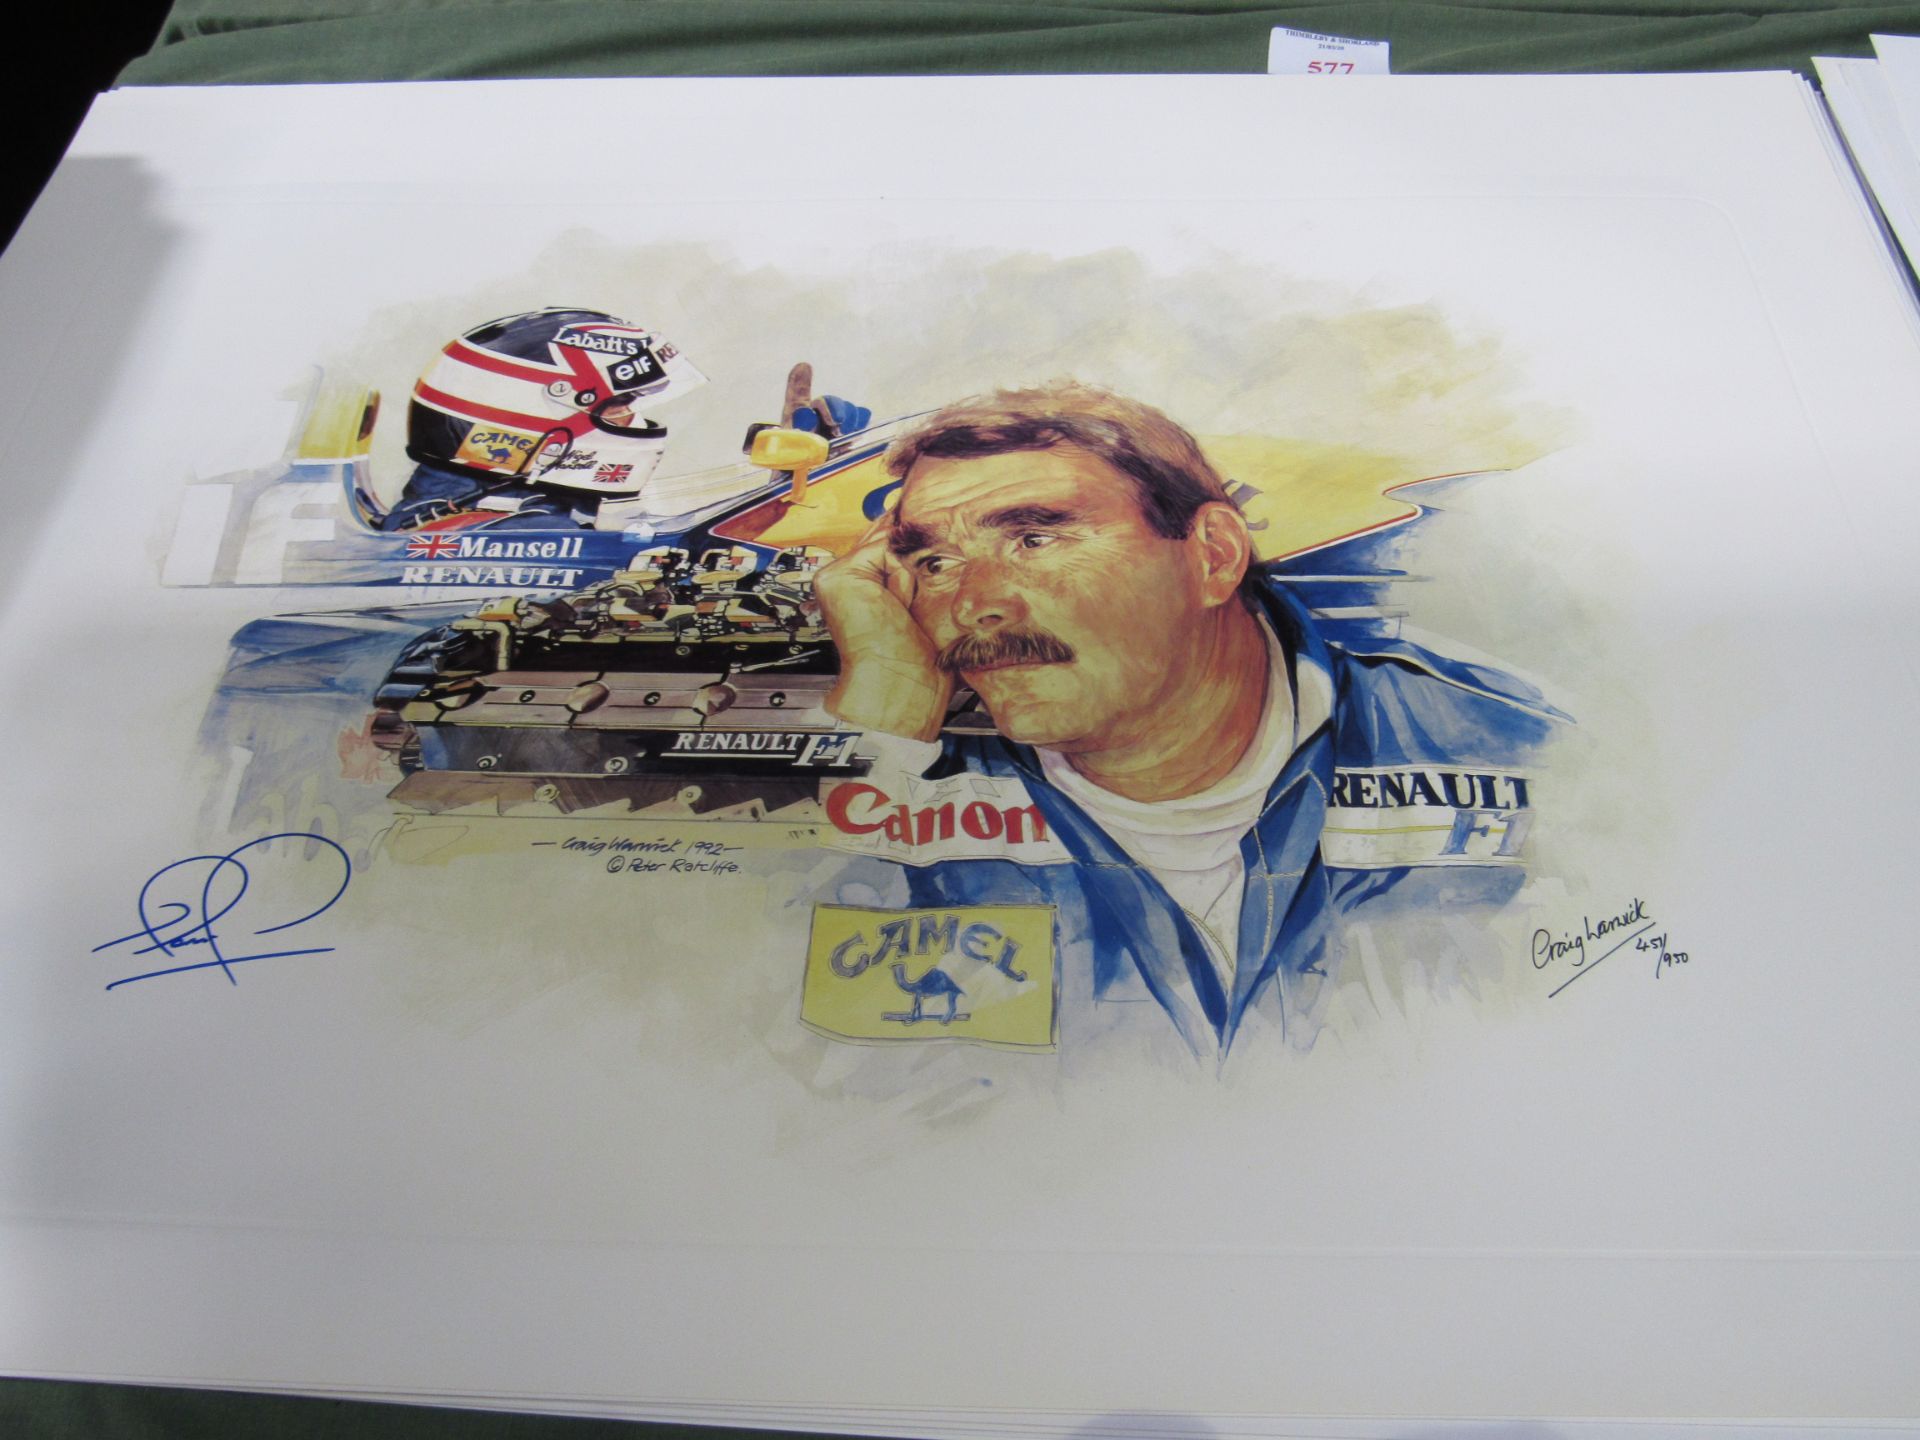 20 various Peter Ratcliffe "Legends in Time" L/E posters of motor racing drivers in cars. - Image 4 of 8